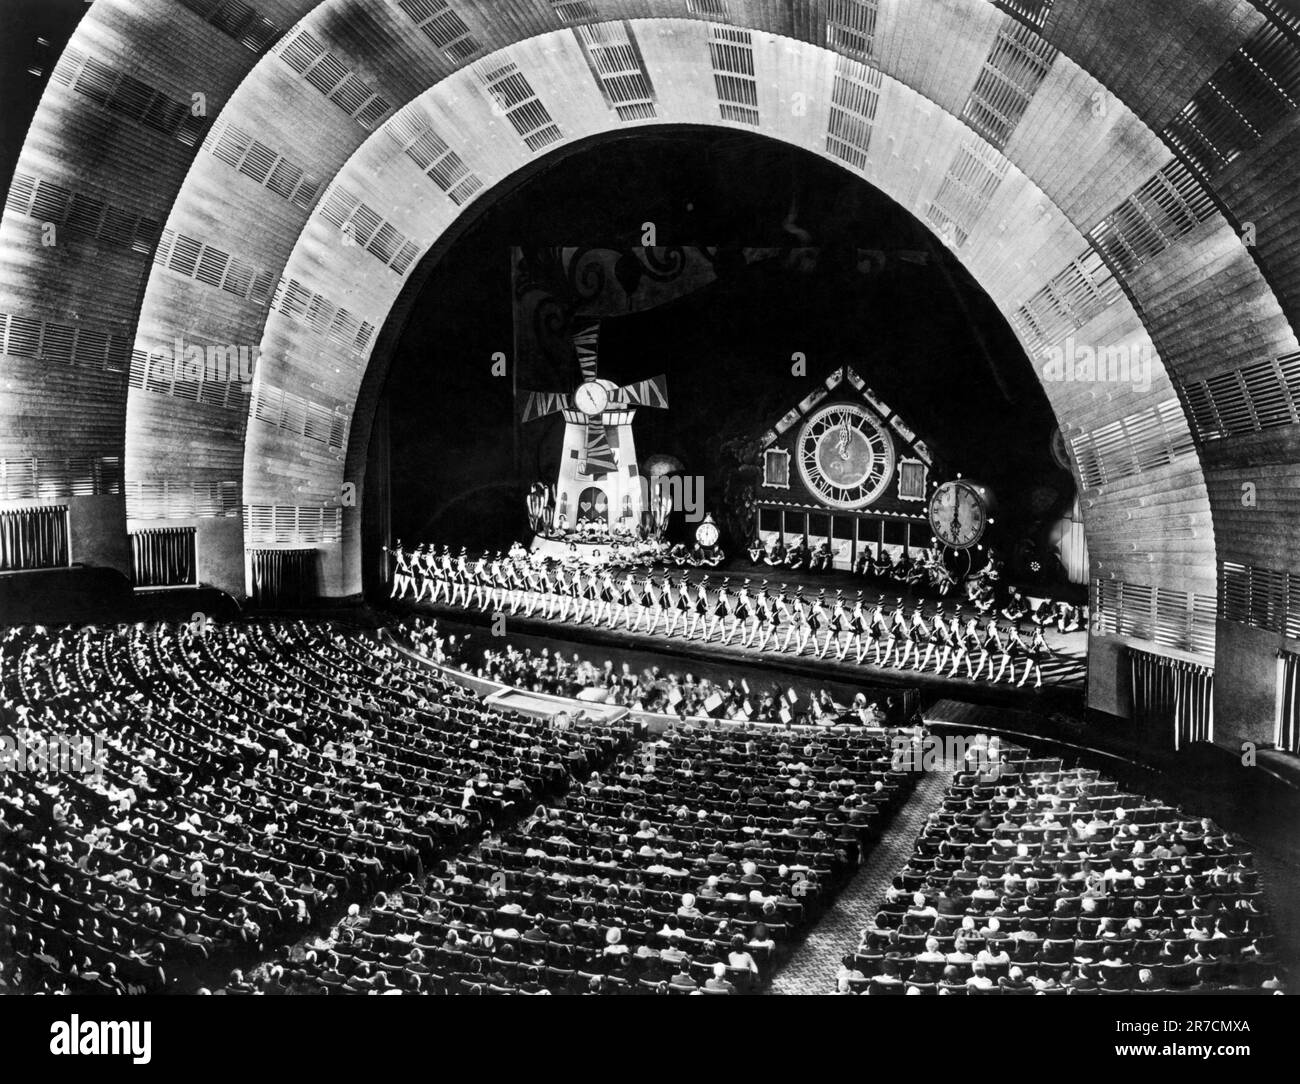 New York, New York  1949 The auditorium of Radio City Music Hall in Rockefeller Center with a capacity  audience of 6,200 persons watching the celebrated Rockettes. Stock Photo